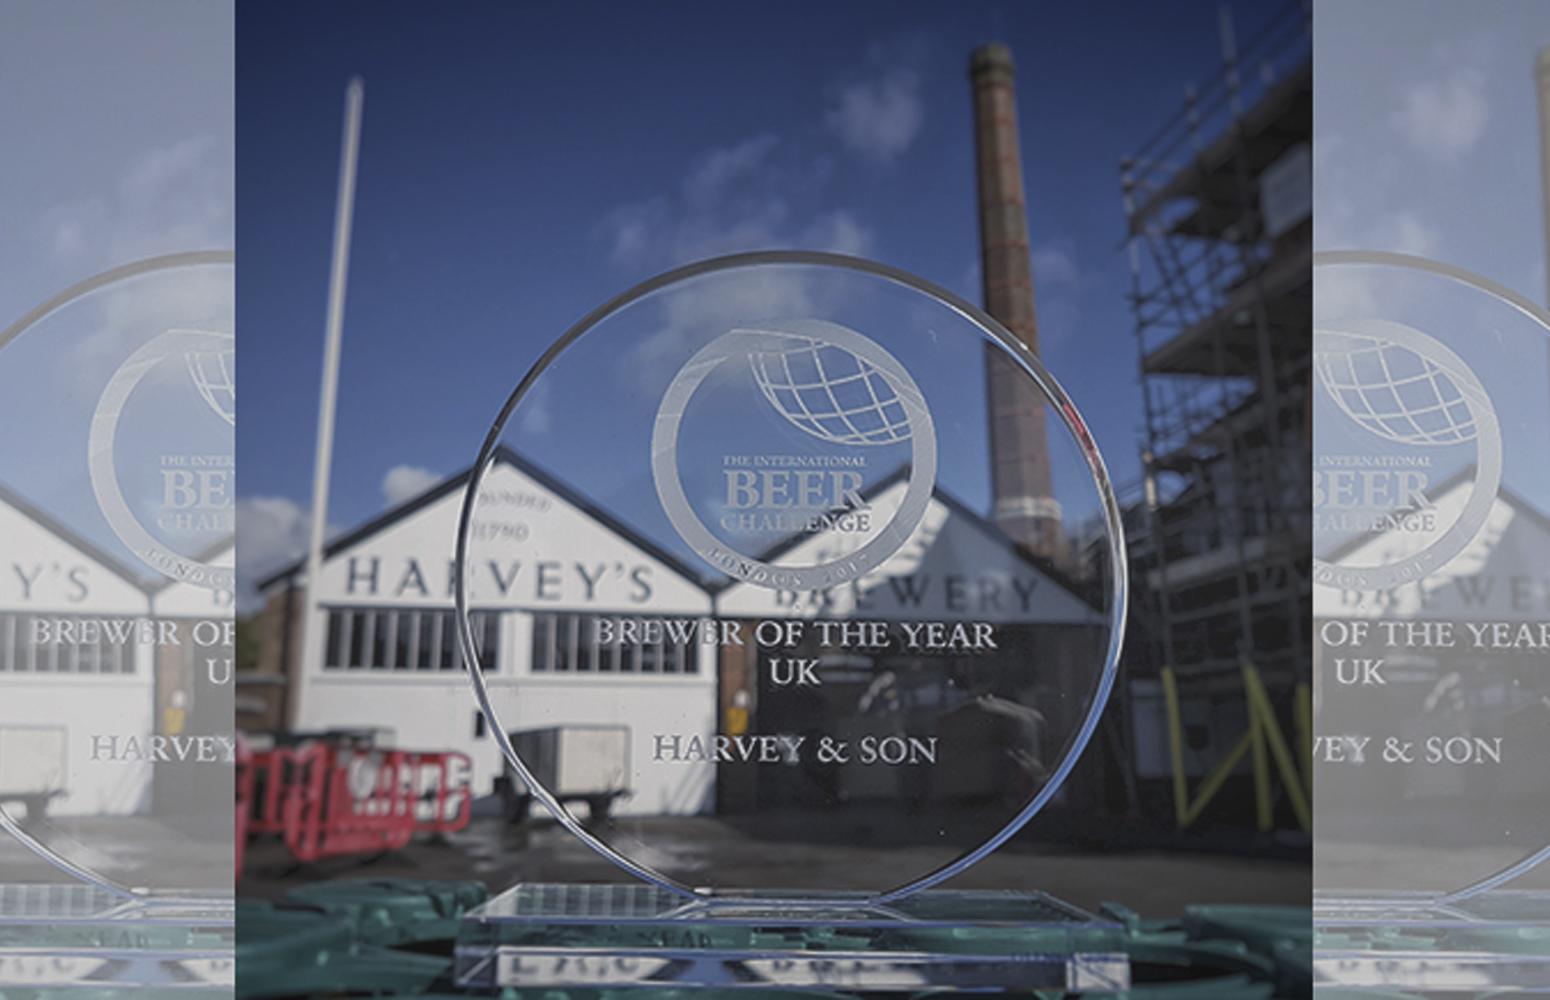 UK Brewer of the Year 2017